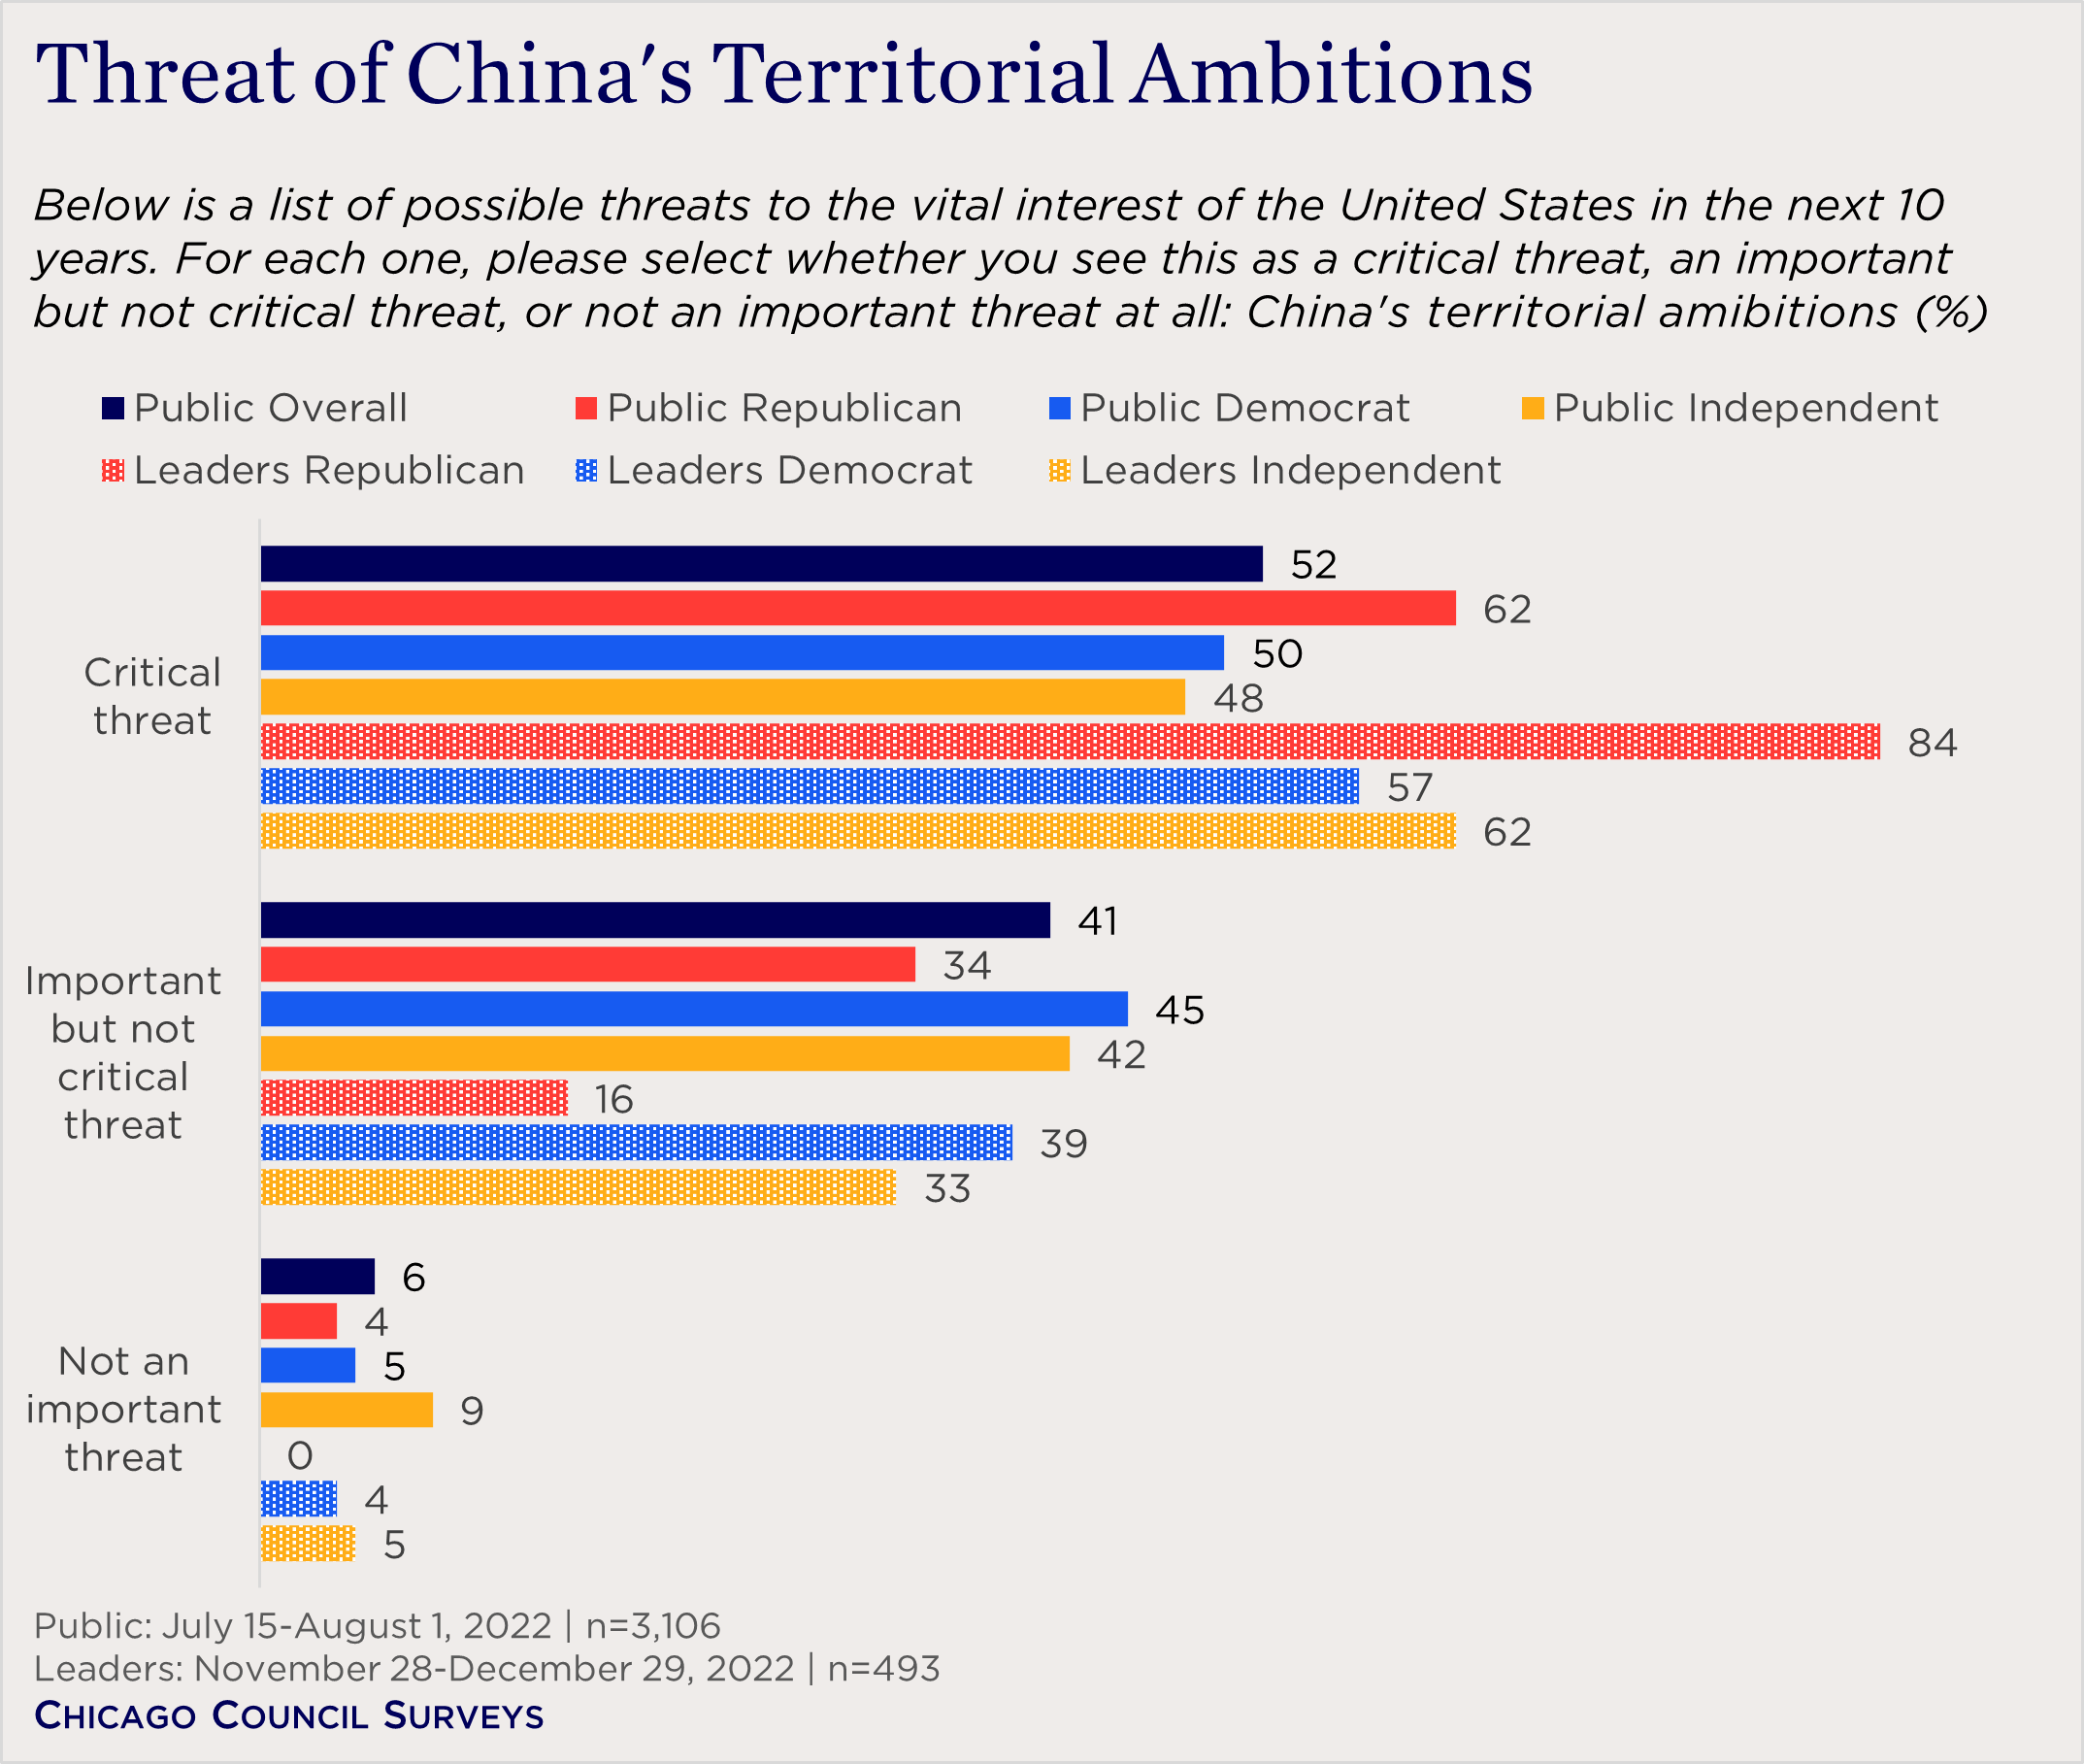 "bar chart showing threat perception of China's territorial ambitions"